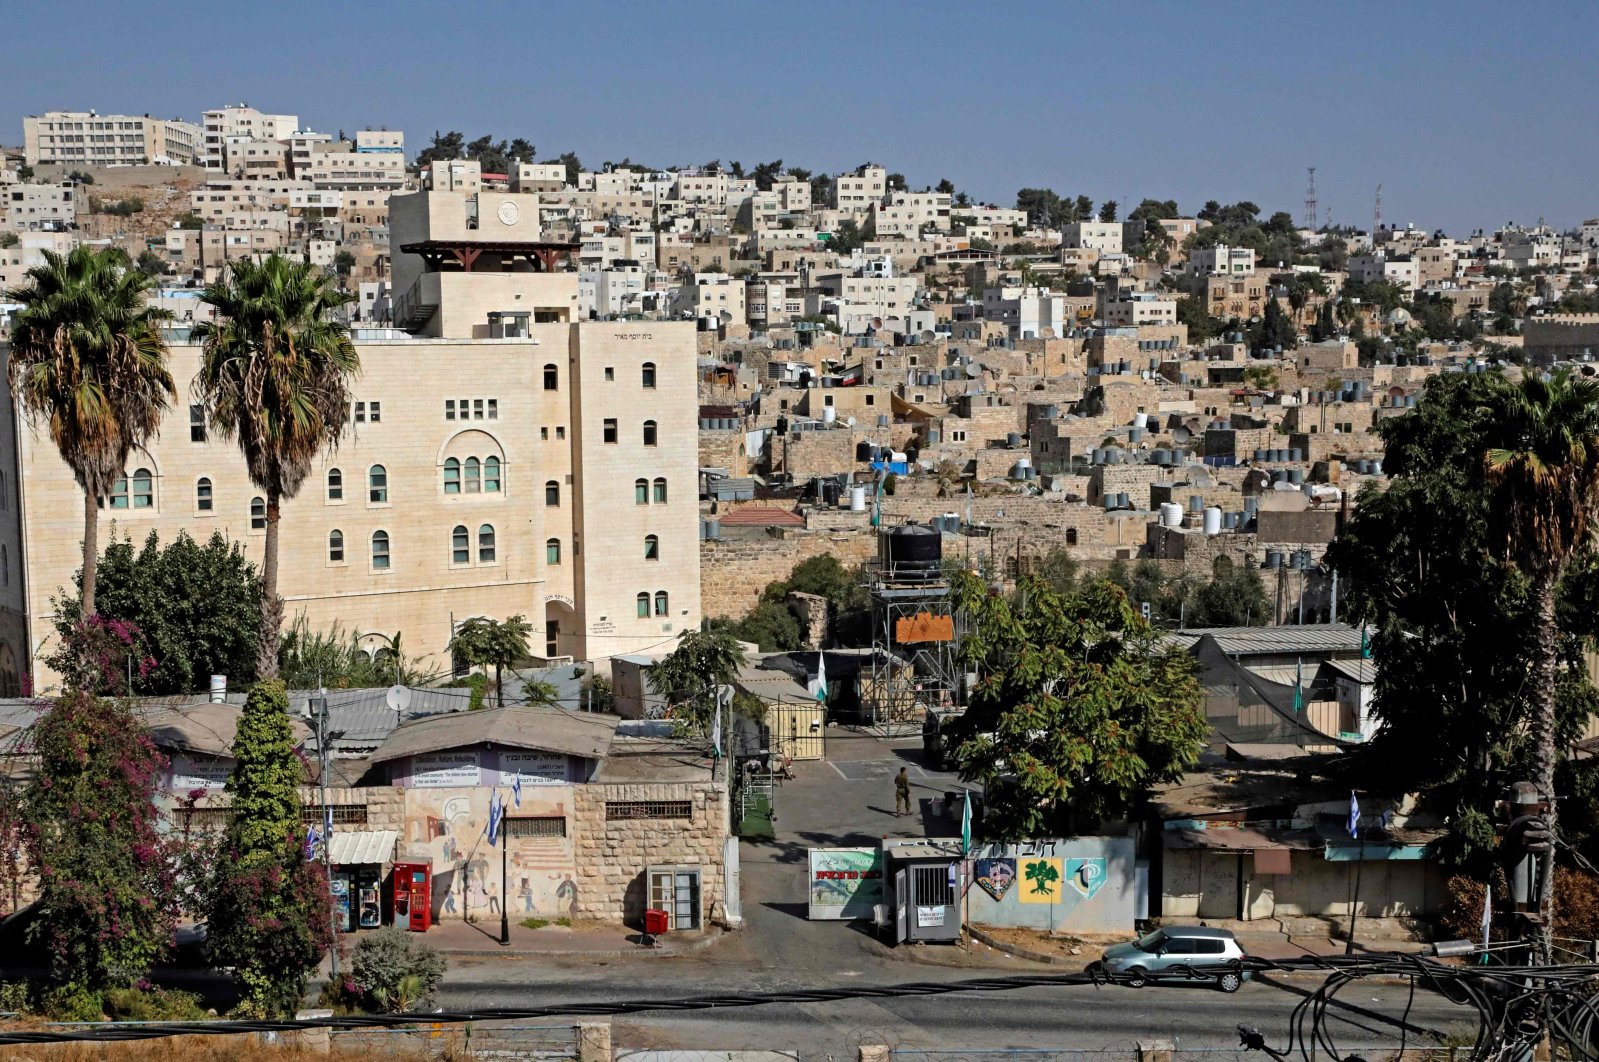 The flashpoint area of the old central bus station in the Palestinian city of Hebron in the occupied West Bank, where Israel has approved the construction of Jewish settler homes for the first time since 2002, according to the anti-occupation group Peace Now, Hebron, West Bank, Palestine, Oct. 27, 2020. (AFP Photo)